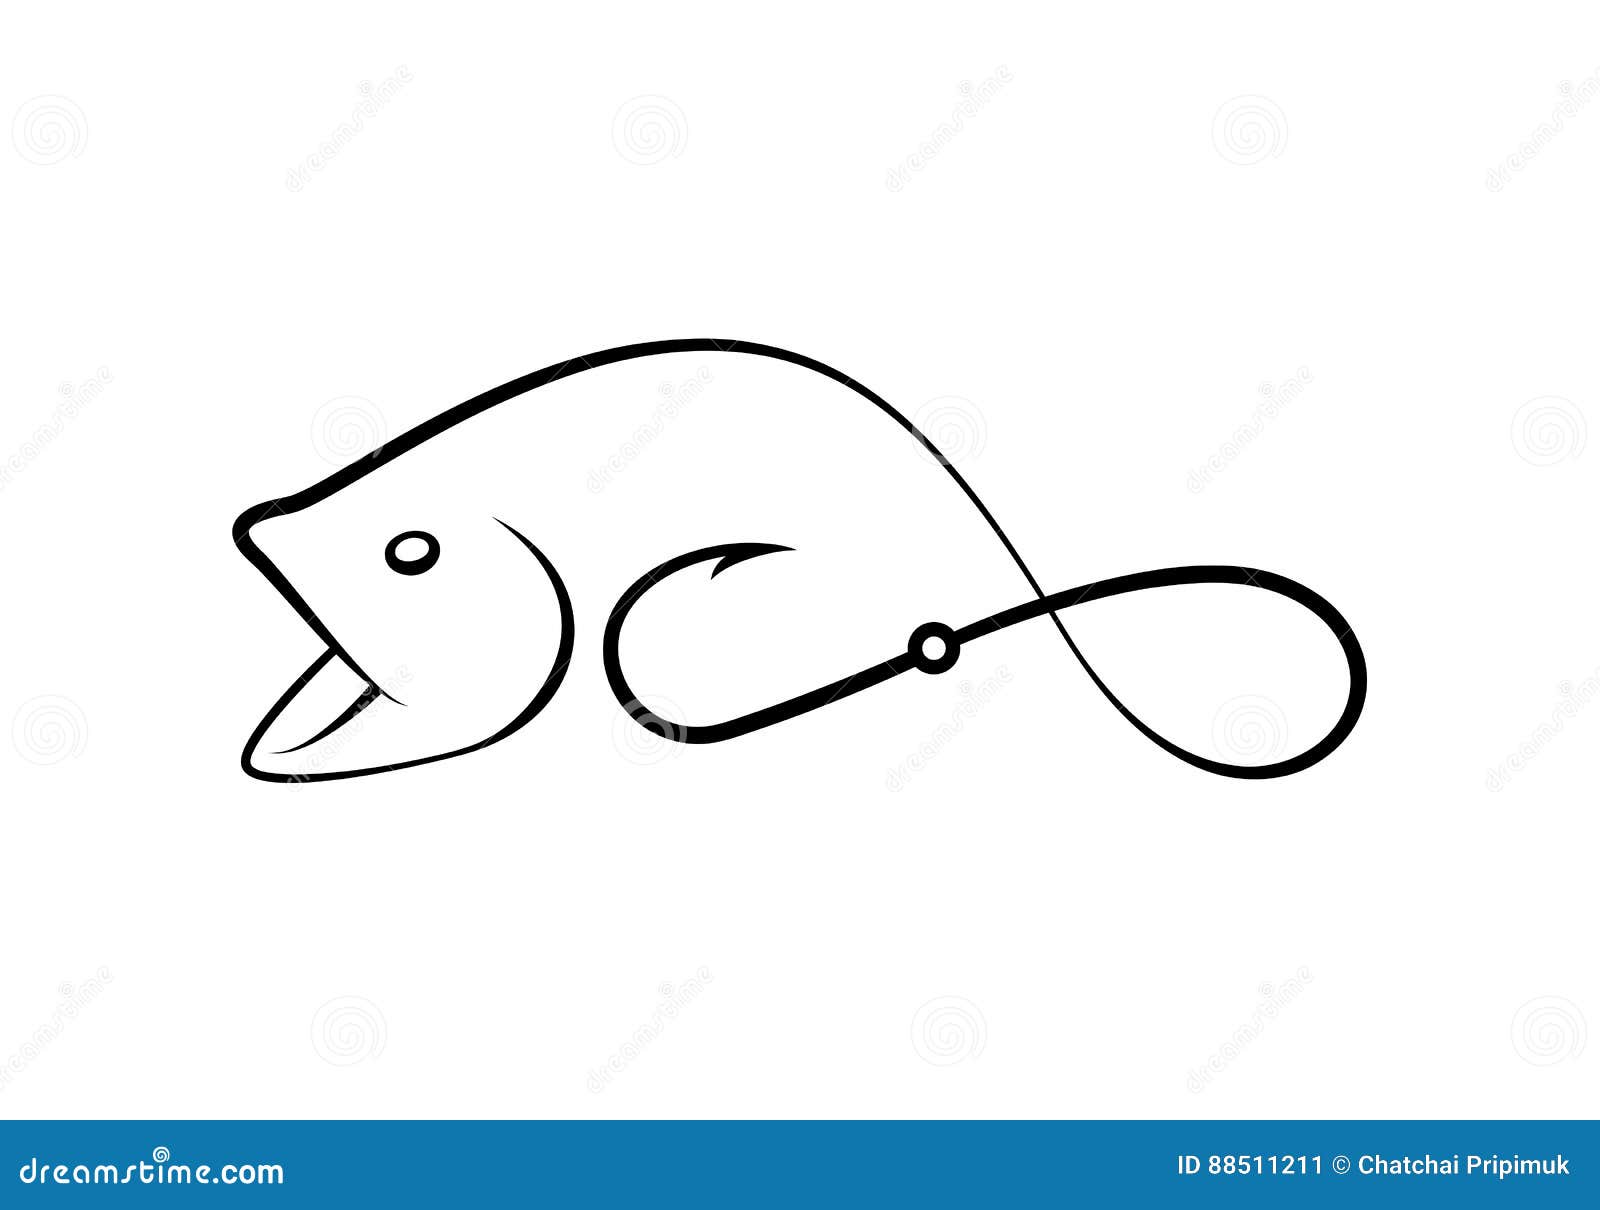 Graphic Fishing Hook, Vector Stock Vector - Illustration of line